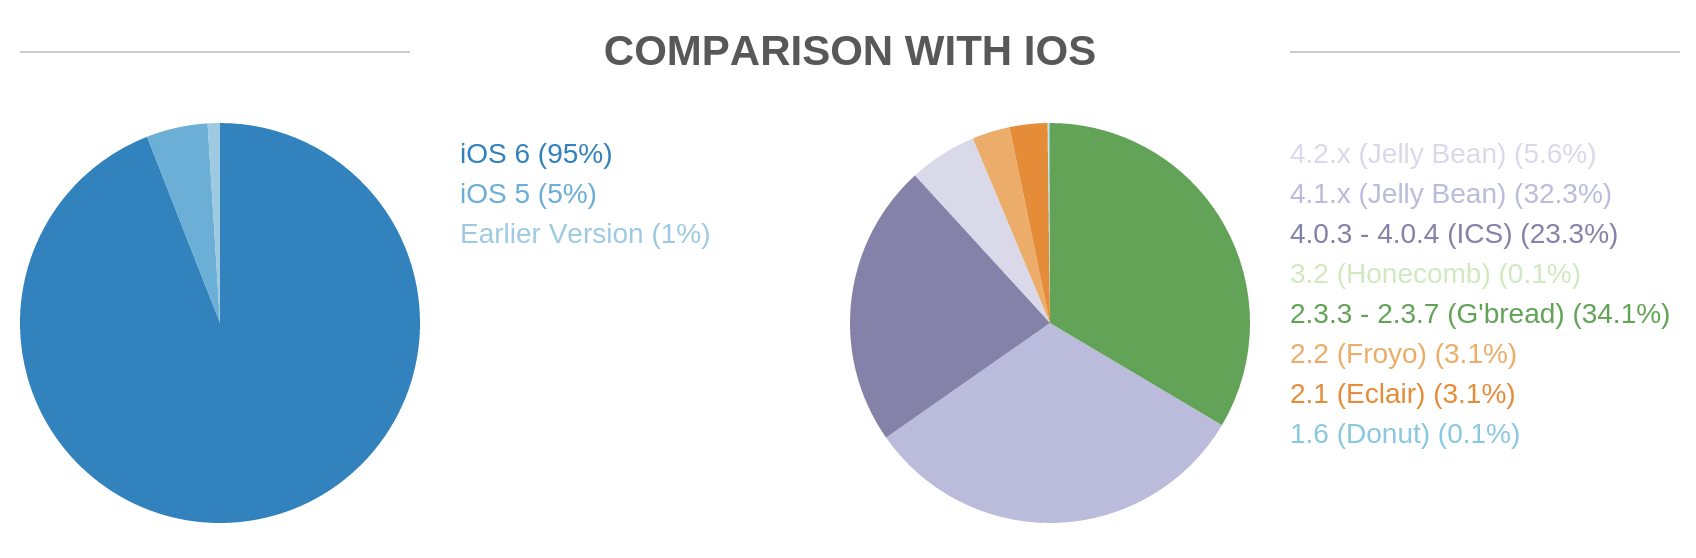 Android and iOS fragmentation are highlighted here.